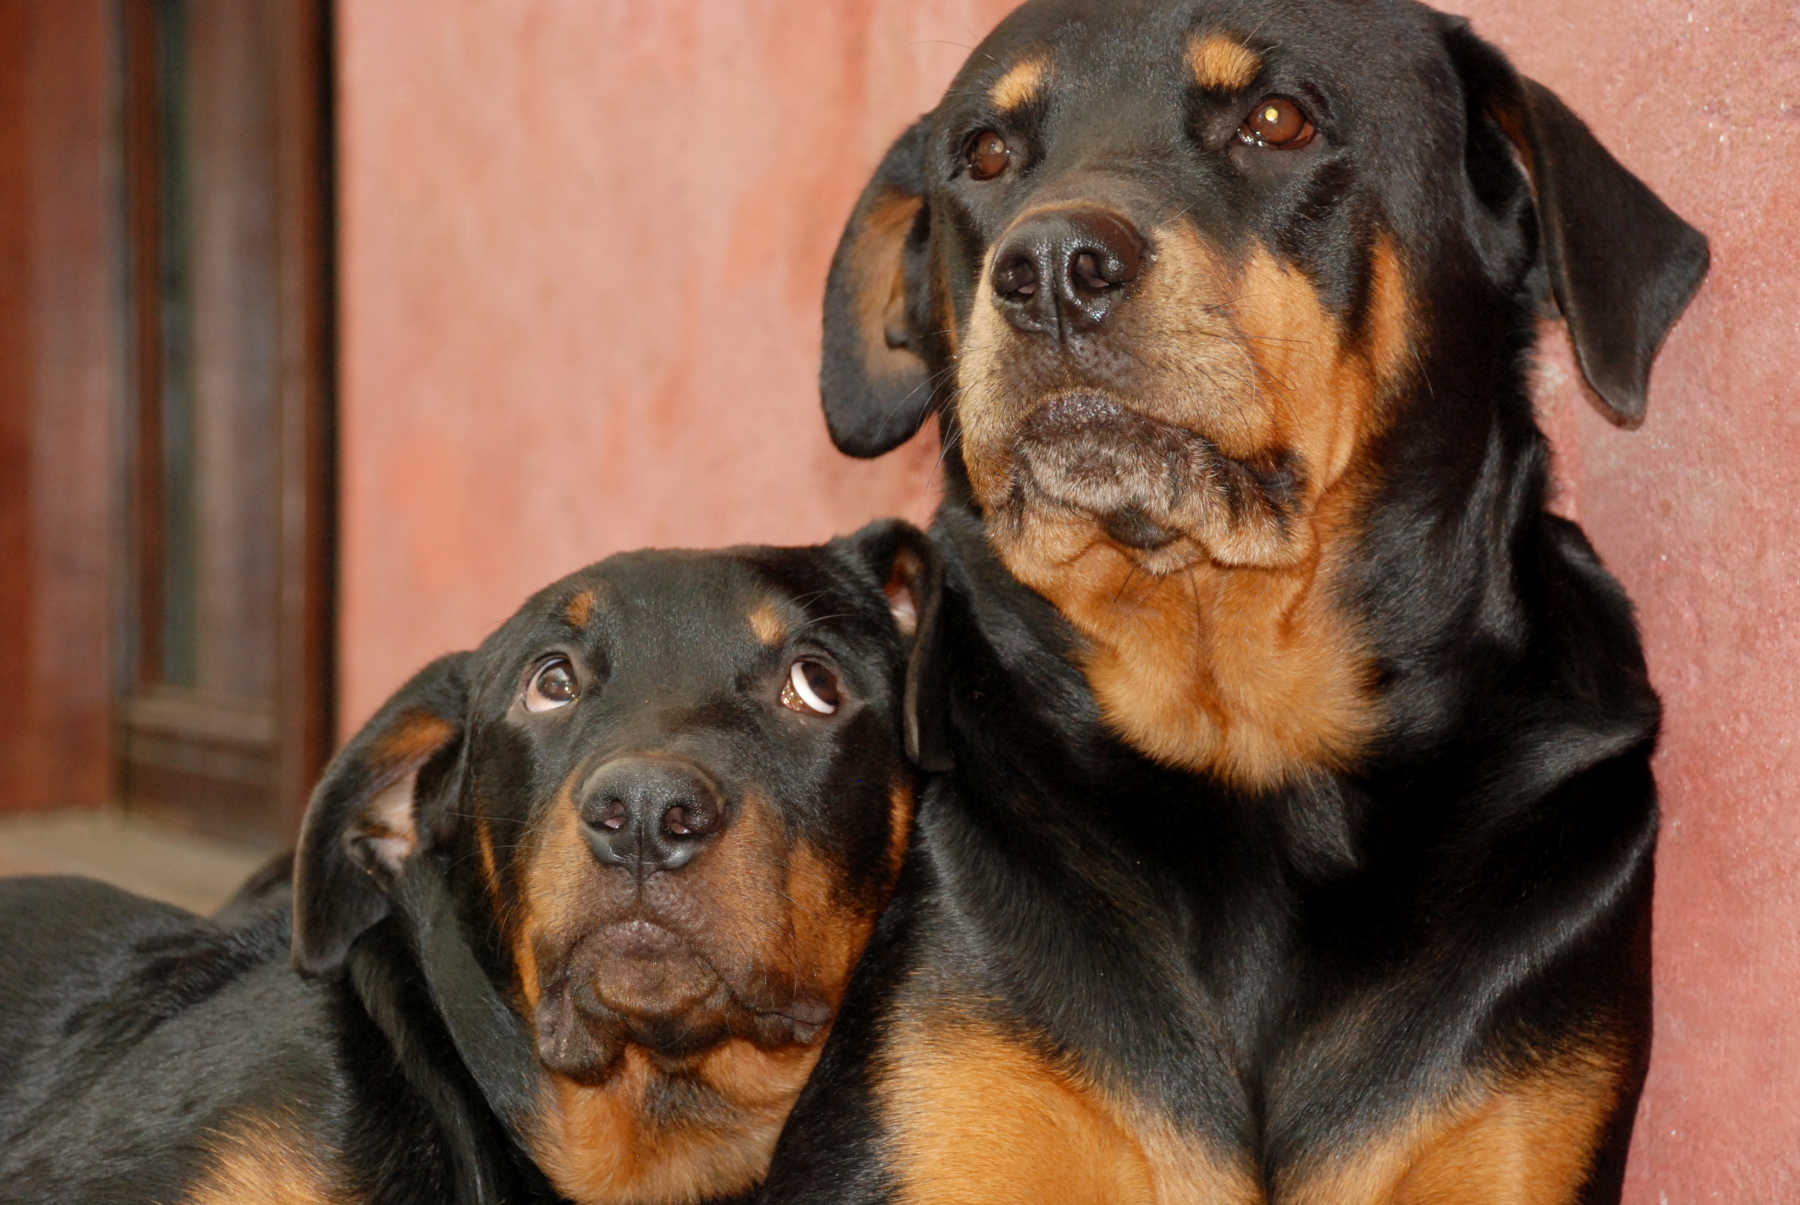 Family's 2 Rottweilers Attack & Kill 10-Month-Old Baby Left Unattended ...